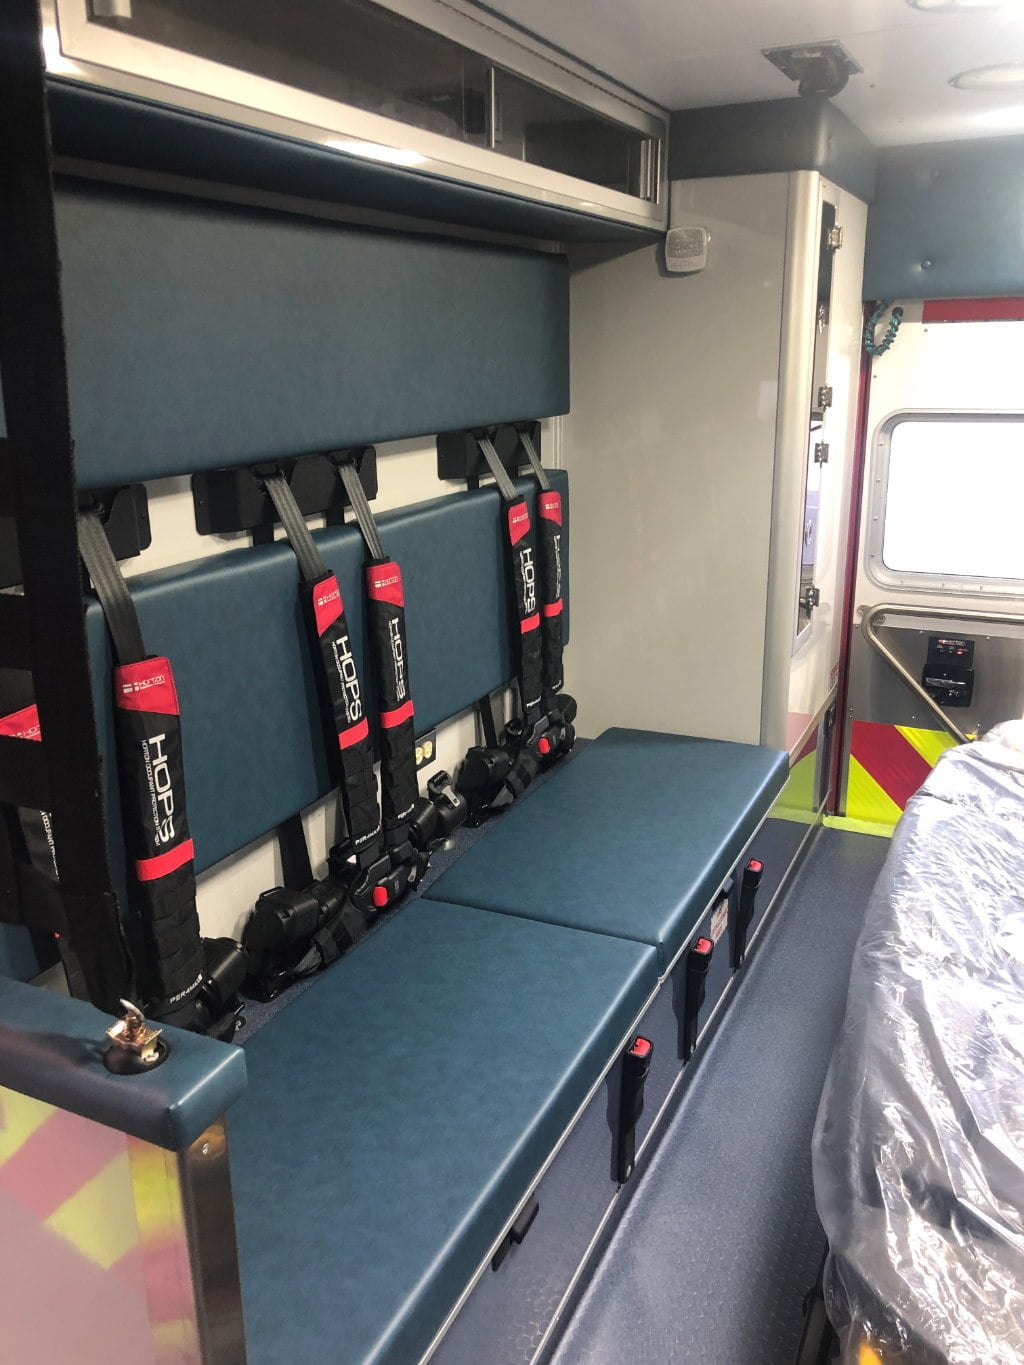 The squad bench area on the new Horton ambulance for North Andover. The ambulance has the Horton Occupant Protection System, which includes Per4Max four-point harness on all seating positions.